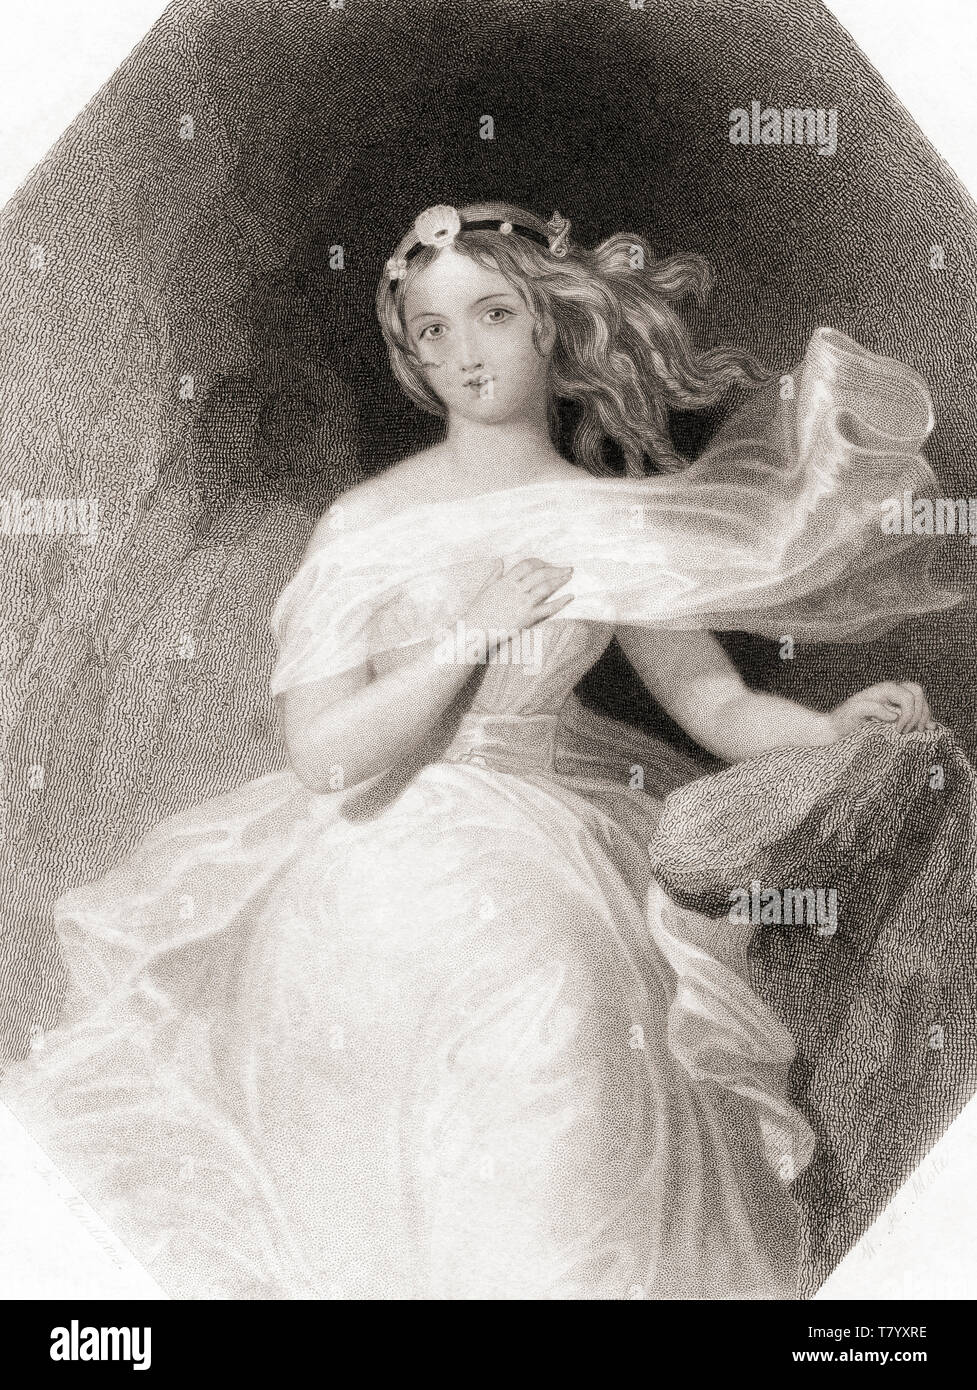 Miranda. Principal female character from Shakespeare's play The Tempest.  From Shakespeare Gallery, published c.1840. Stock Photo